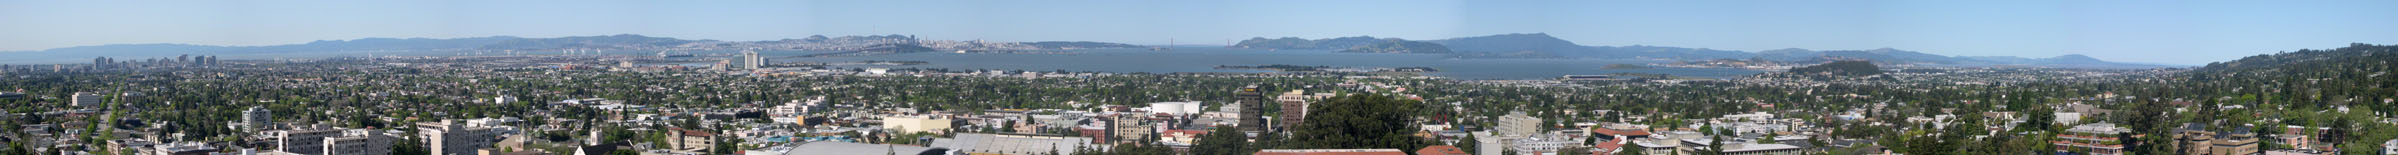 North View From Sather Tower, By Gordon Mei, April 22, 2004